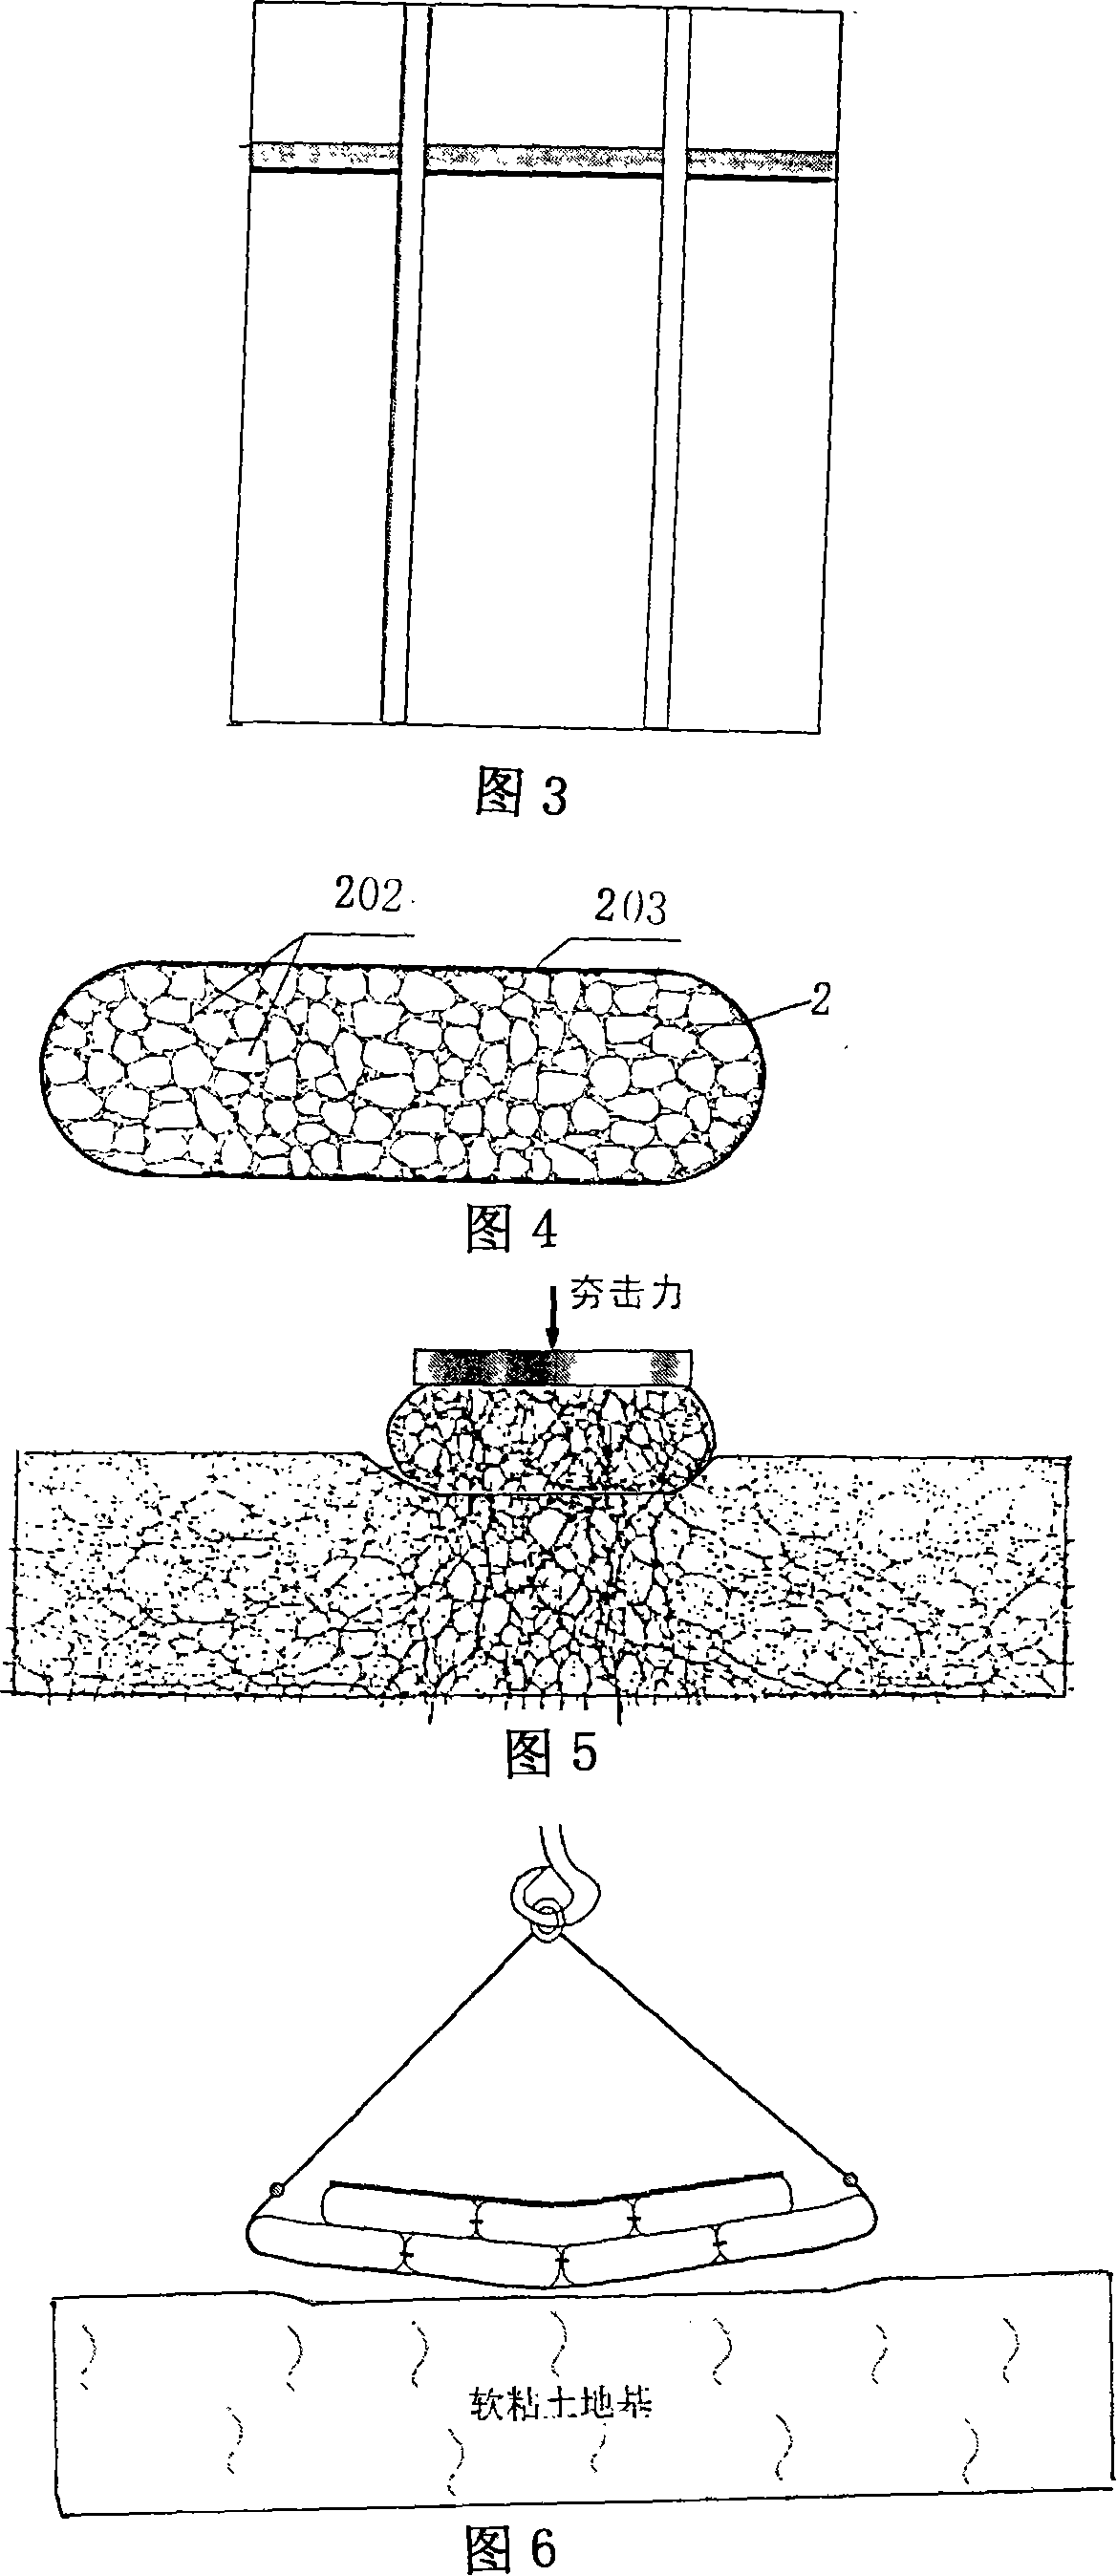 Movable feeding and constructing method for dynamic reinforcing surface layer of large area flabbiness foundation